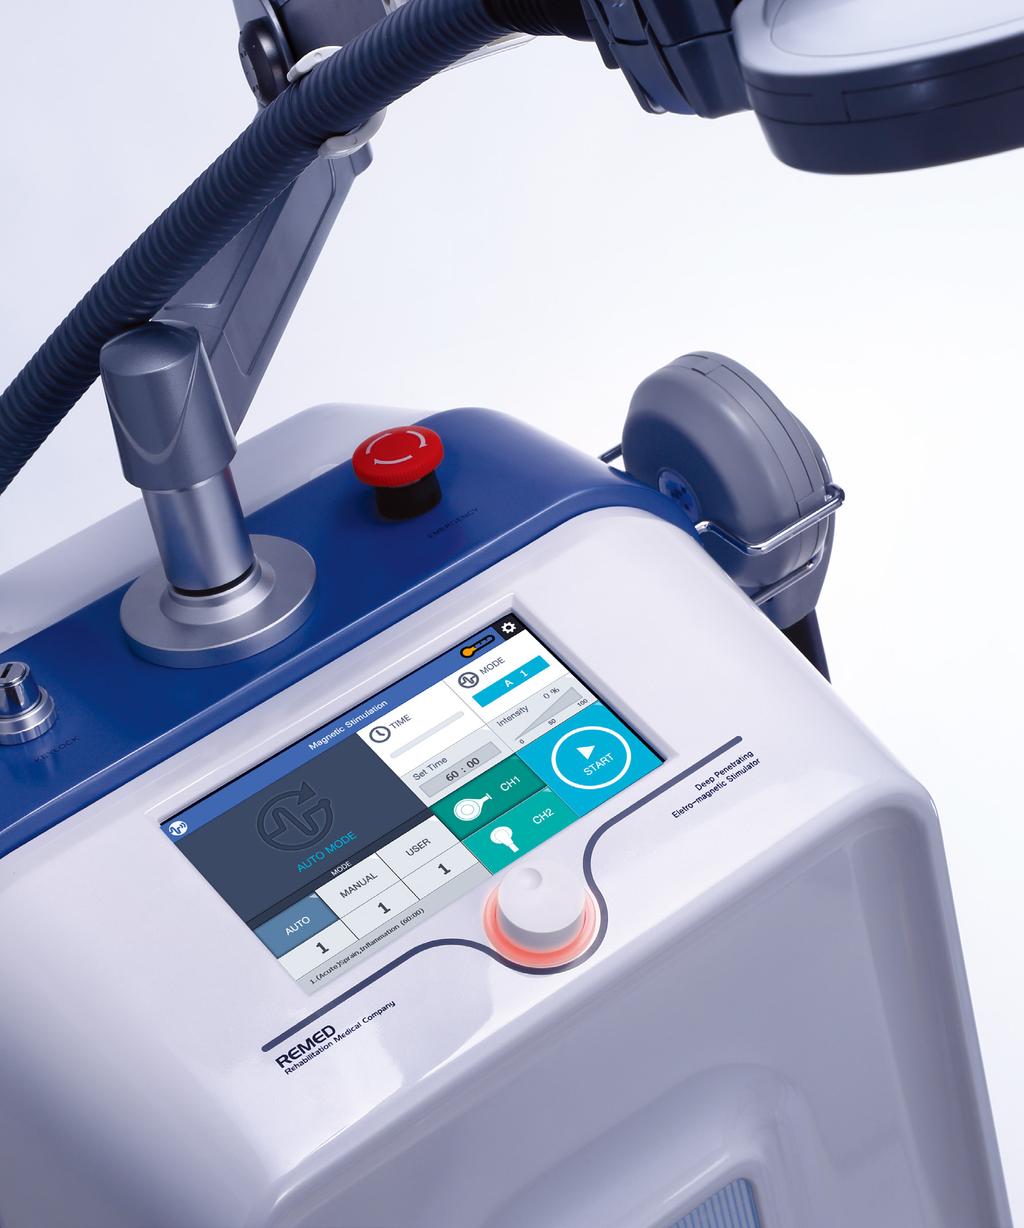 penetrating treatment effect by 3 Tesla Non-invasive and non-contact transducer to patient